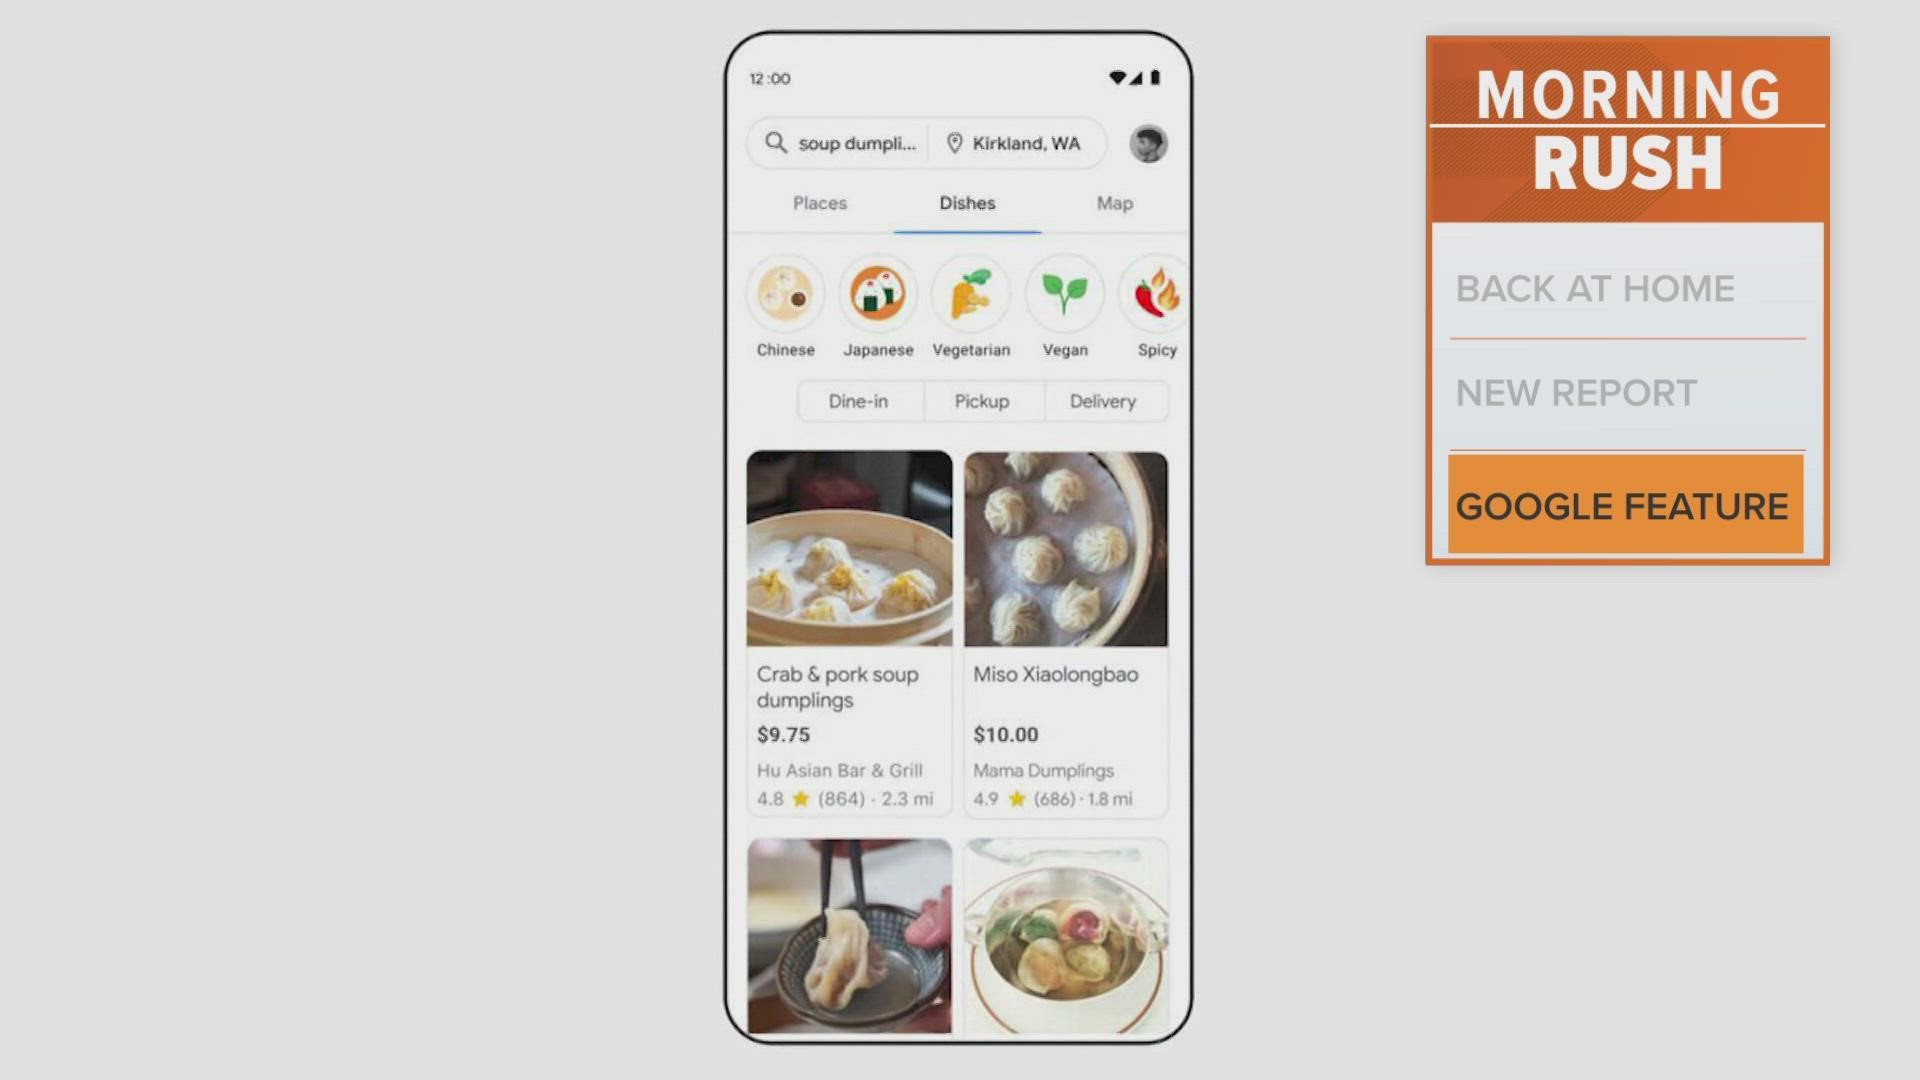 Users will soon be able to find a specific meal that's close to them.